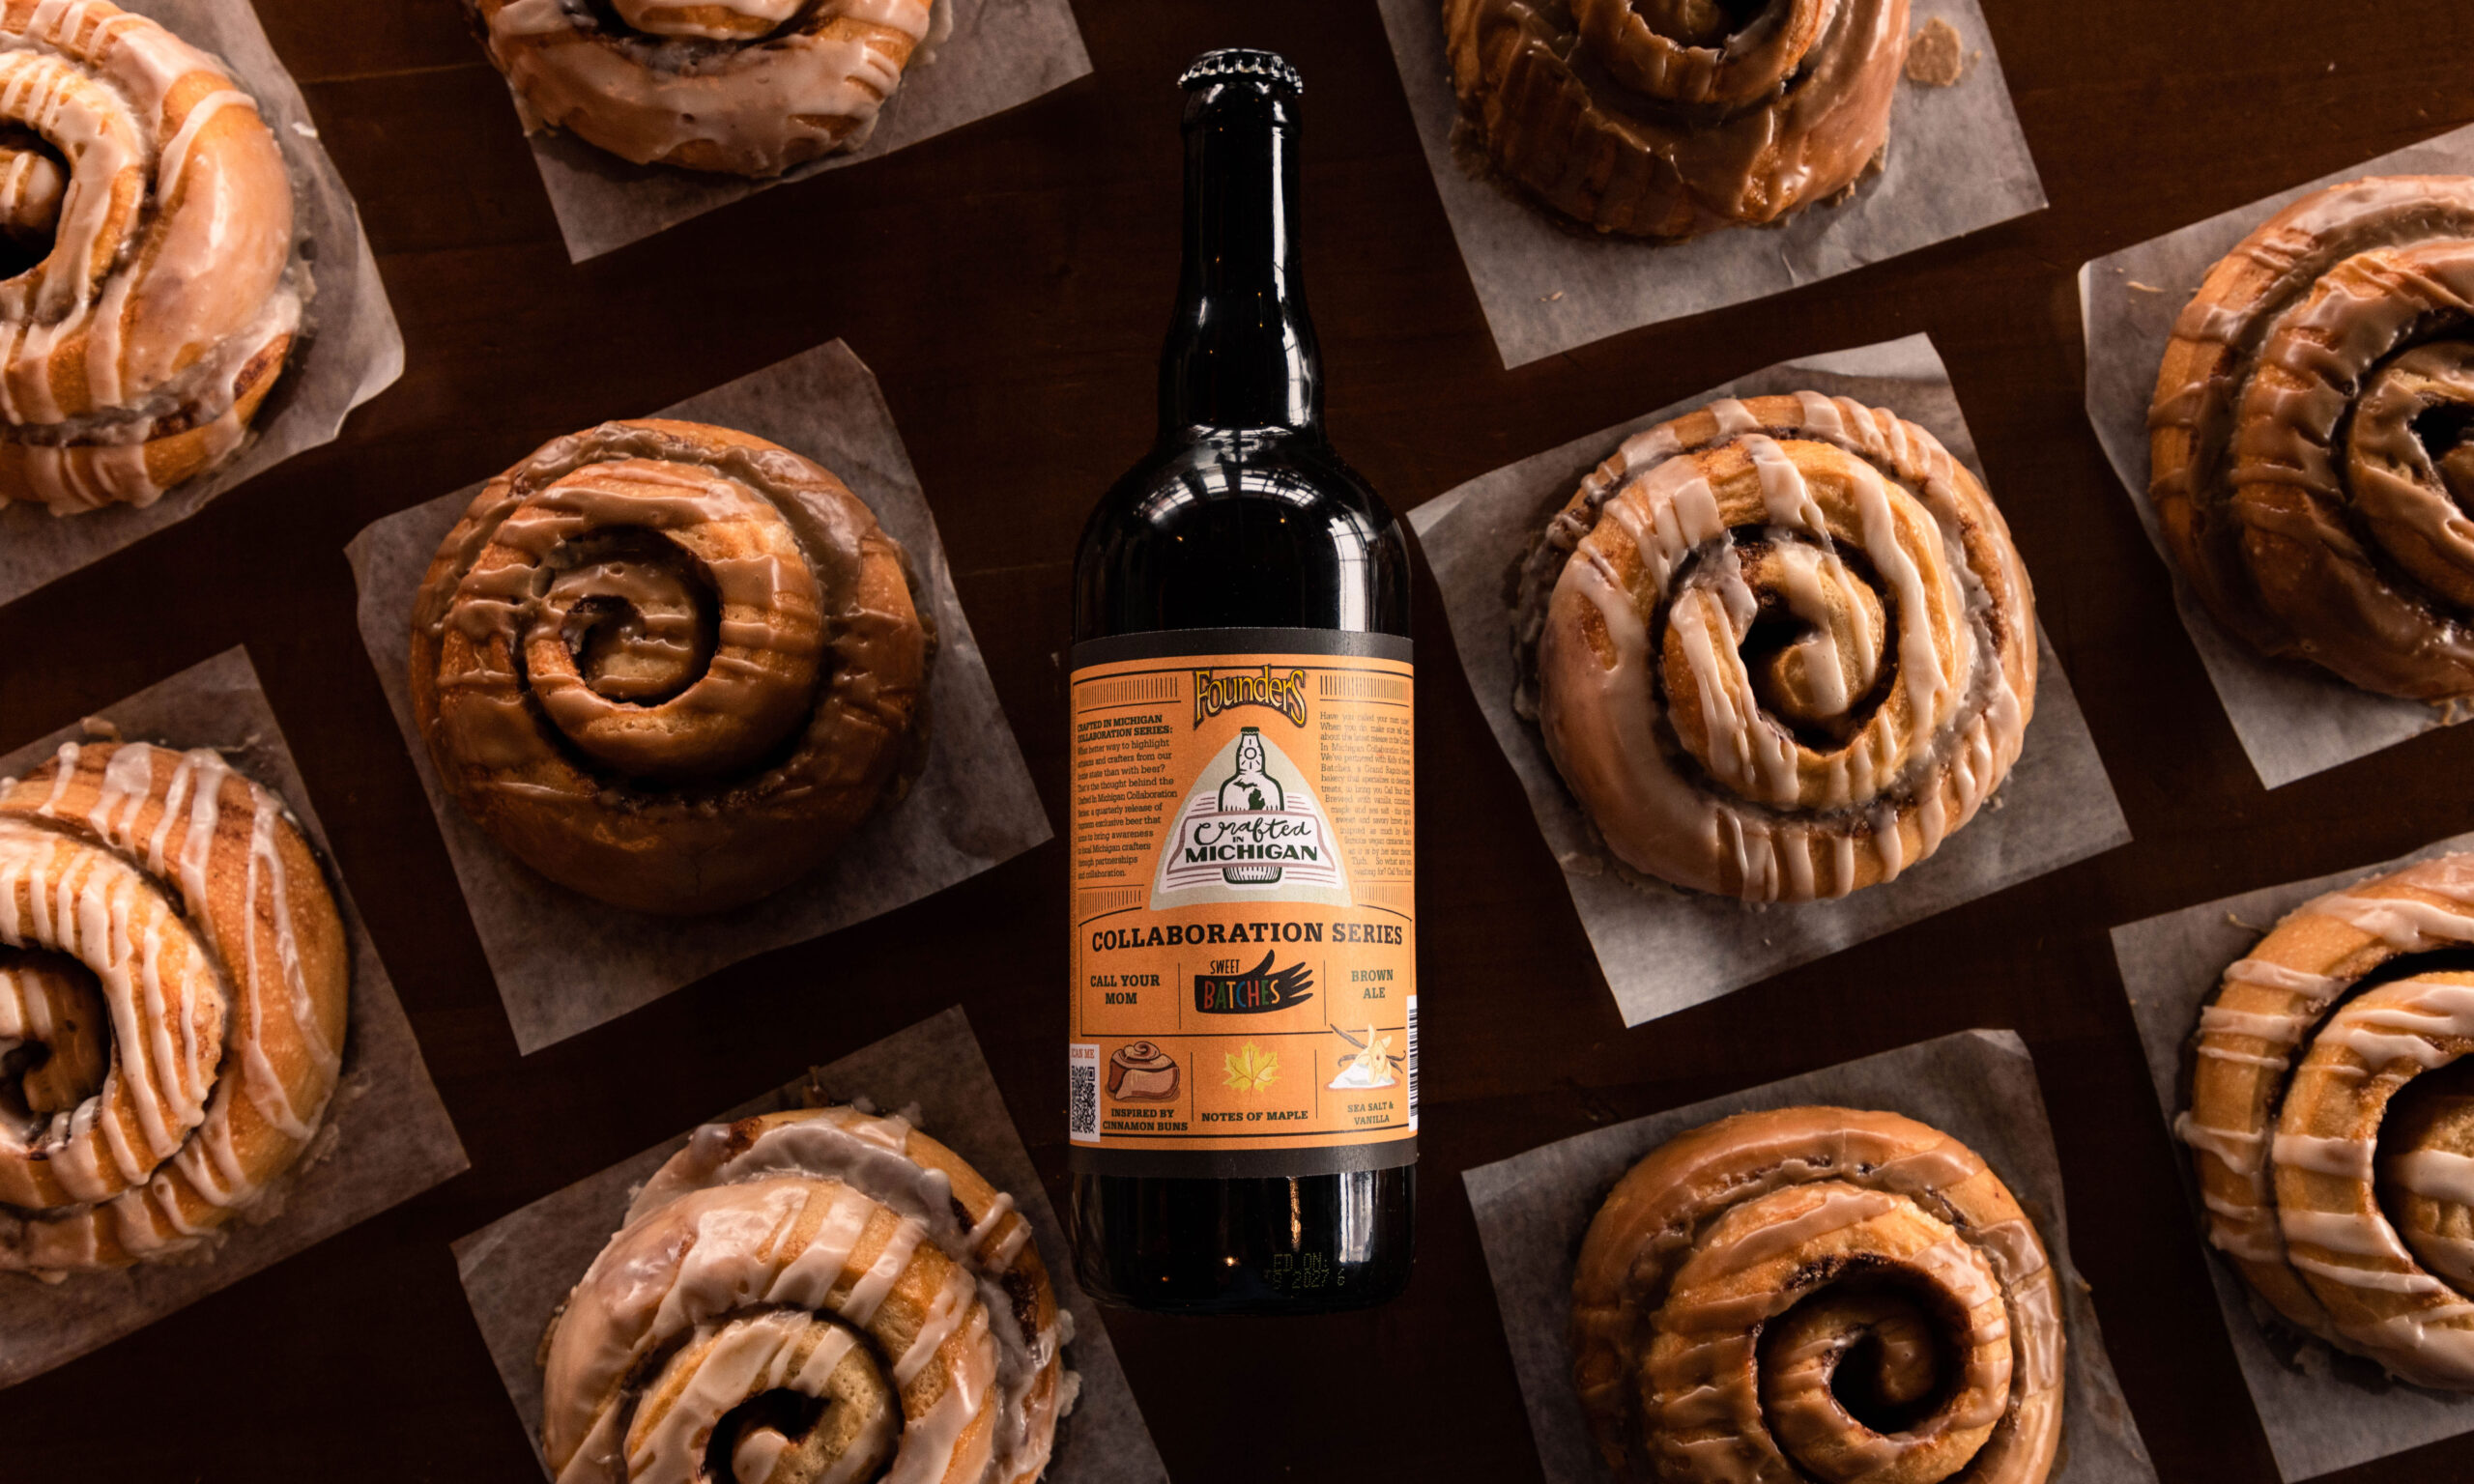  750 mL Bottle of Call Your Mom! amidst cinnamon rolls